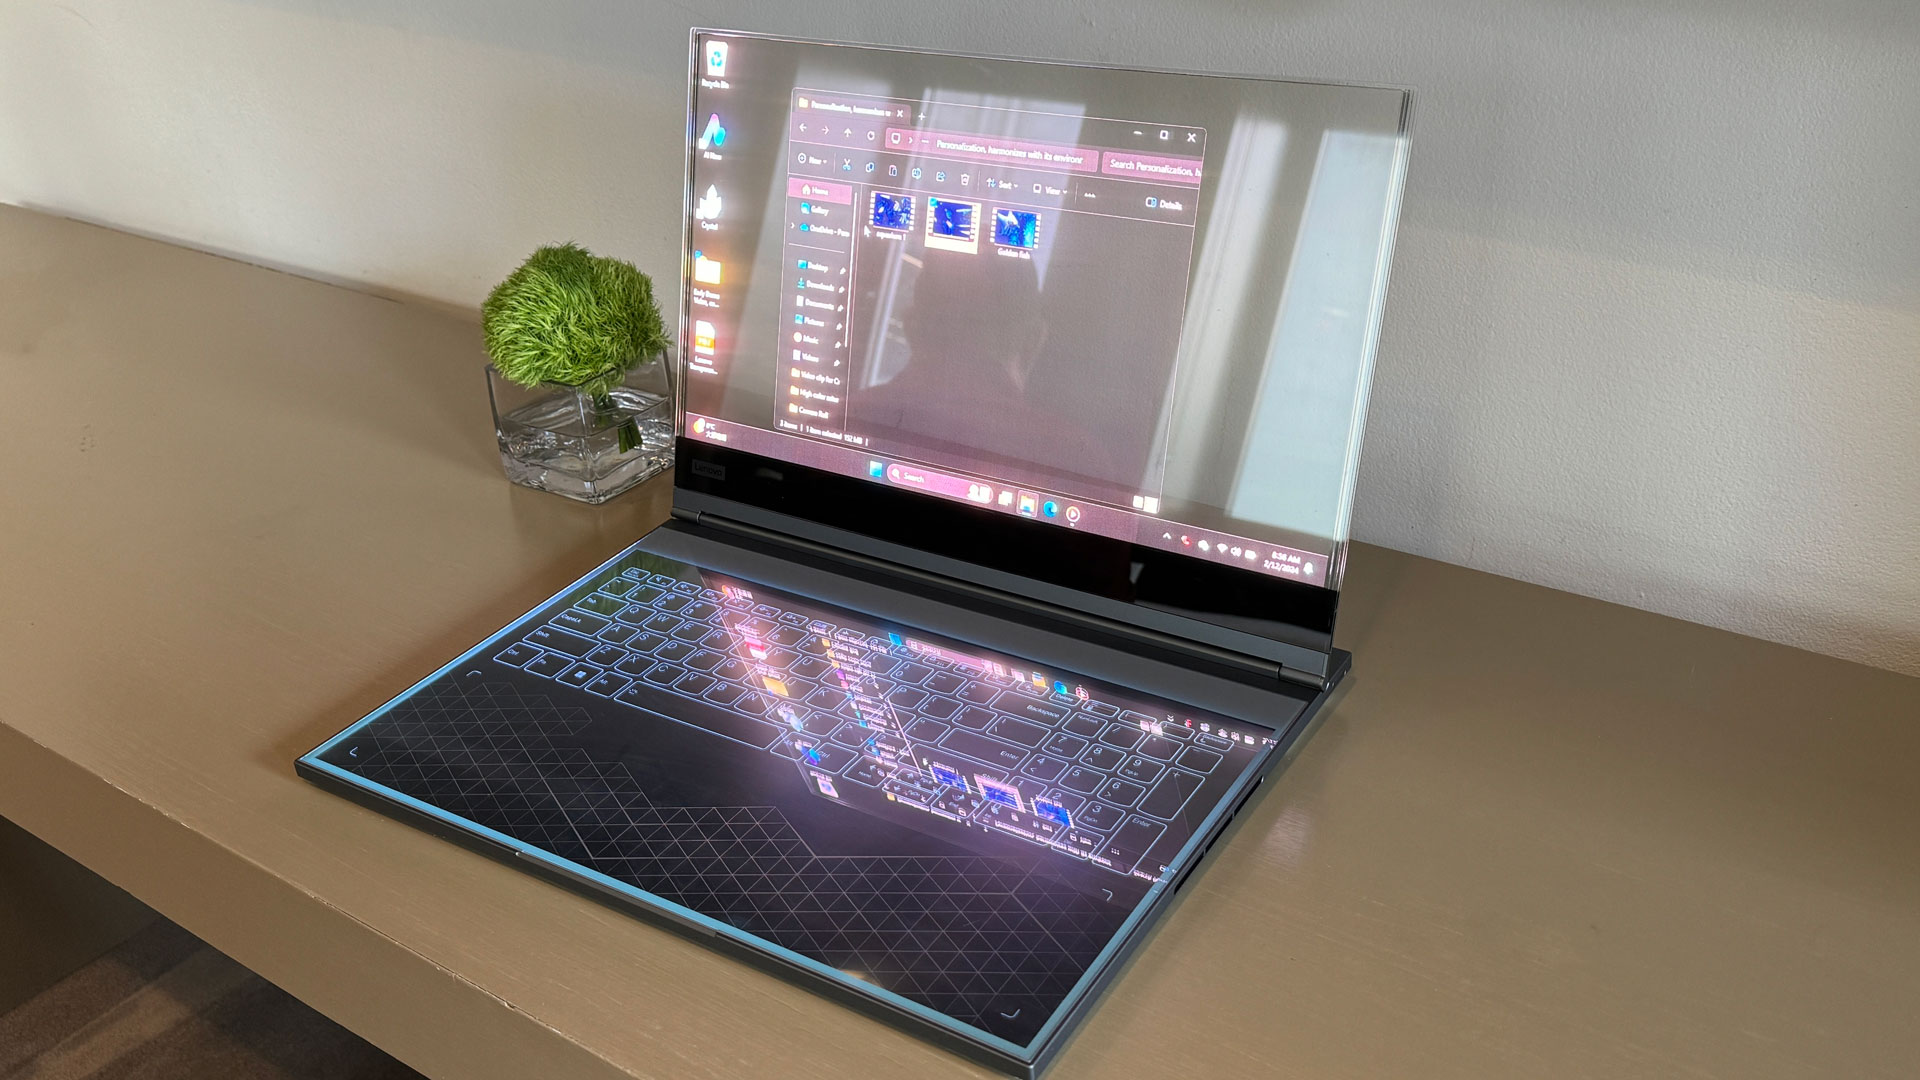 Lenovo shows off a concept laptop with a transparent micro-LED display at MWC, and is making some ThinkPads more repairable